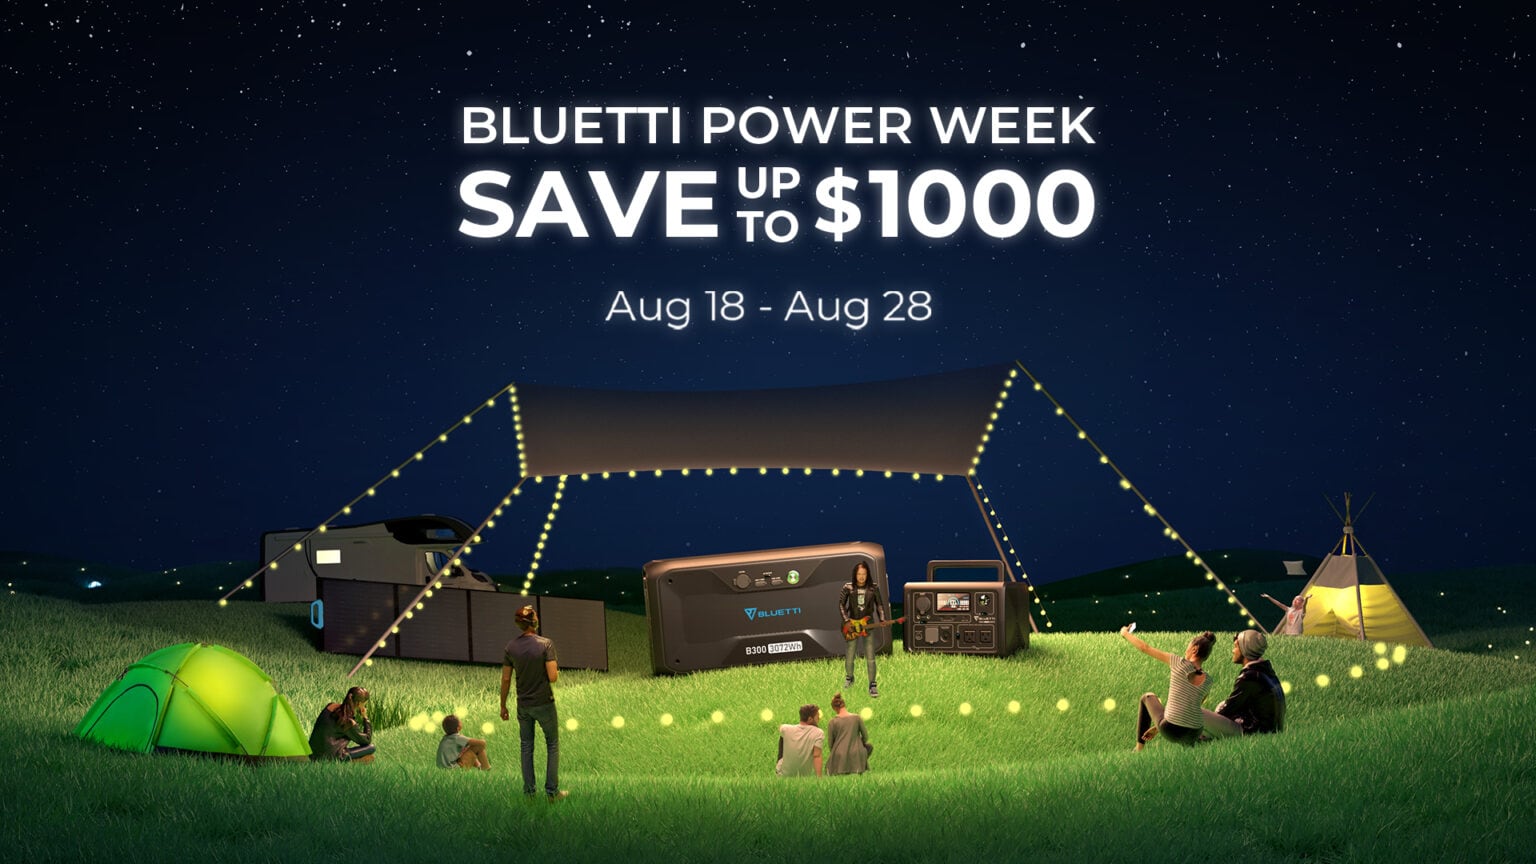 Bluetti Power Week features great deals on premium power stations, backup batteries and more.